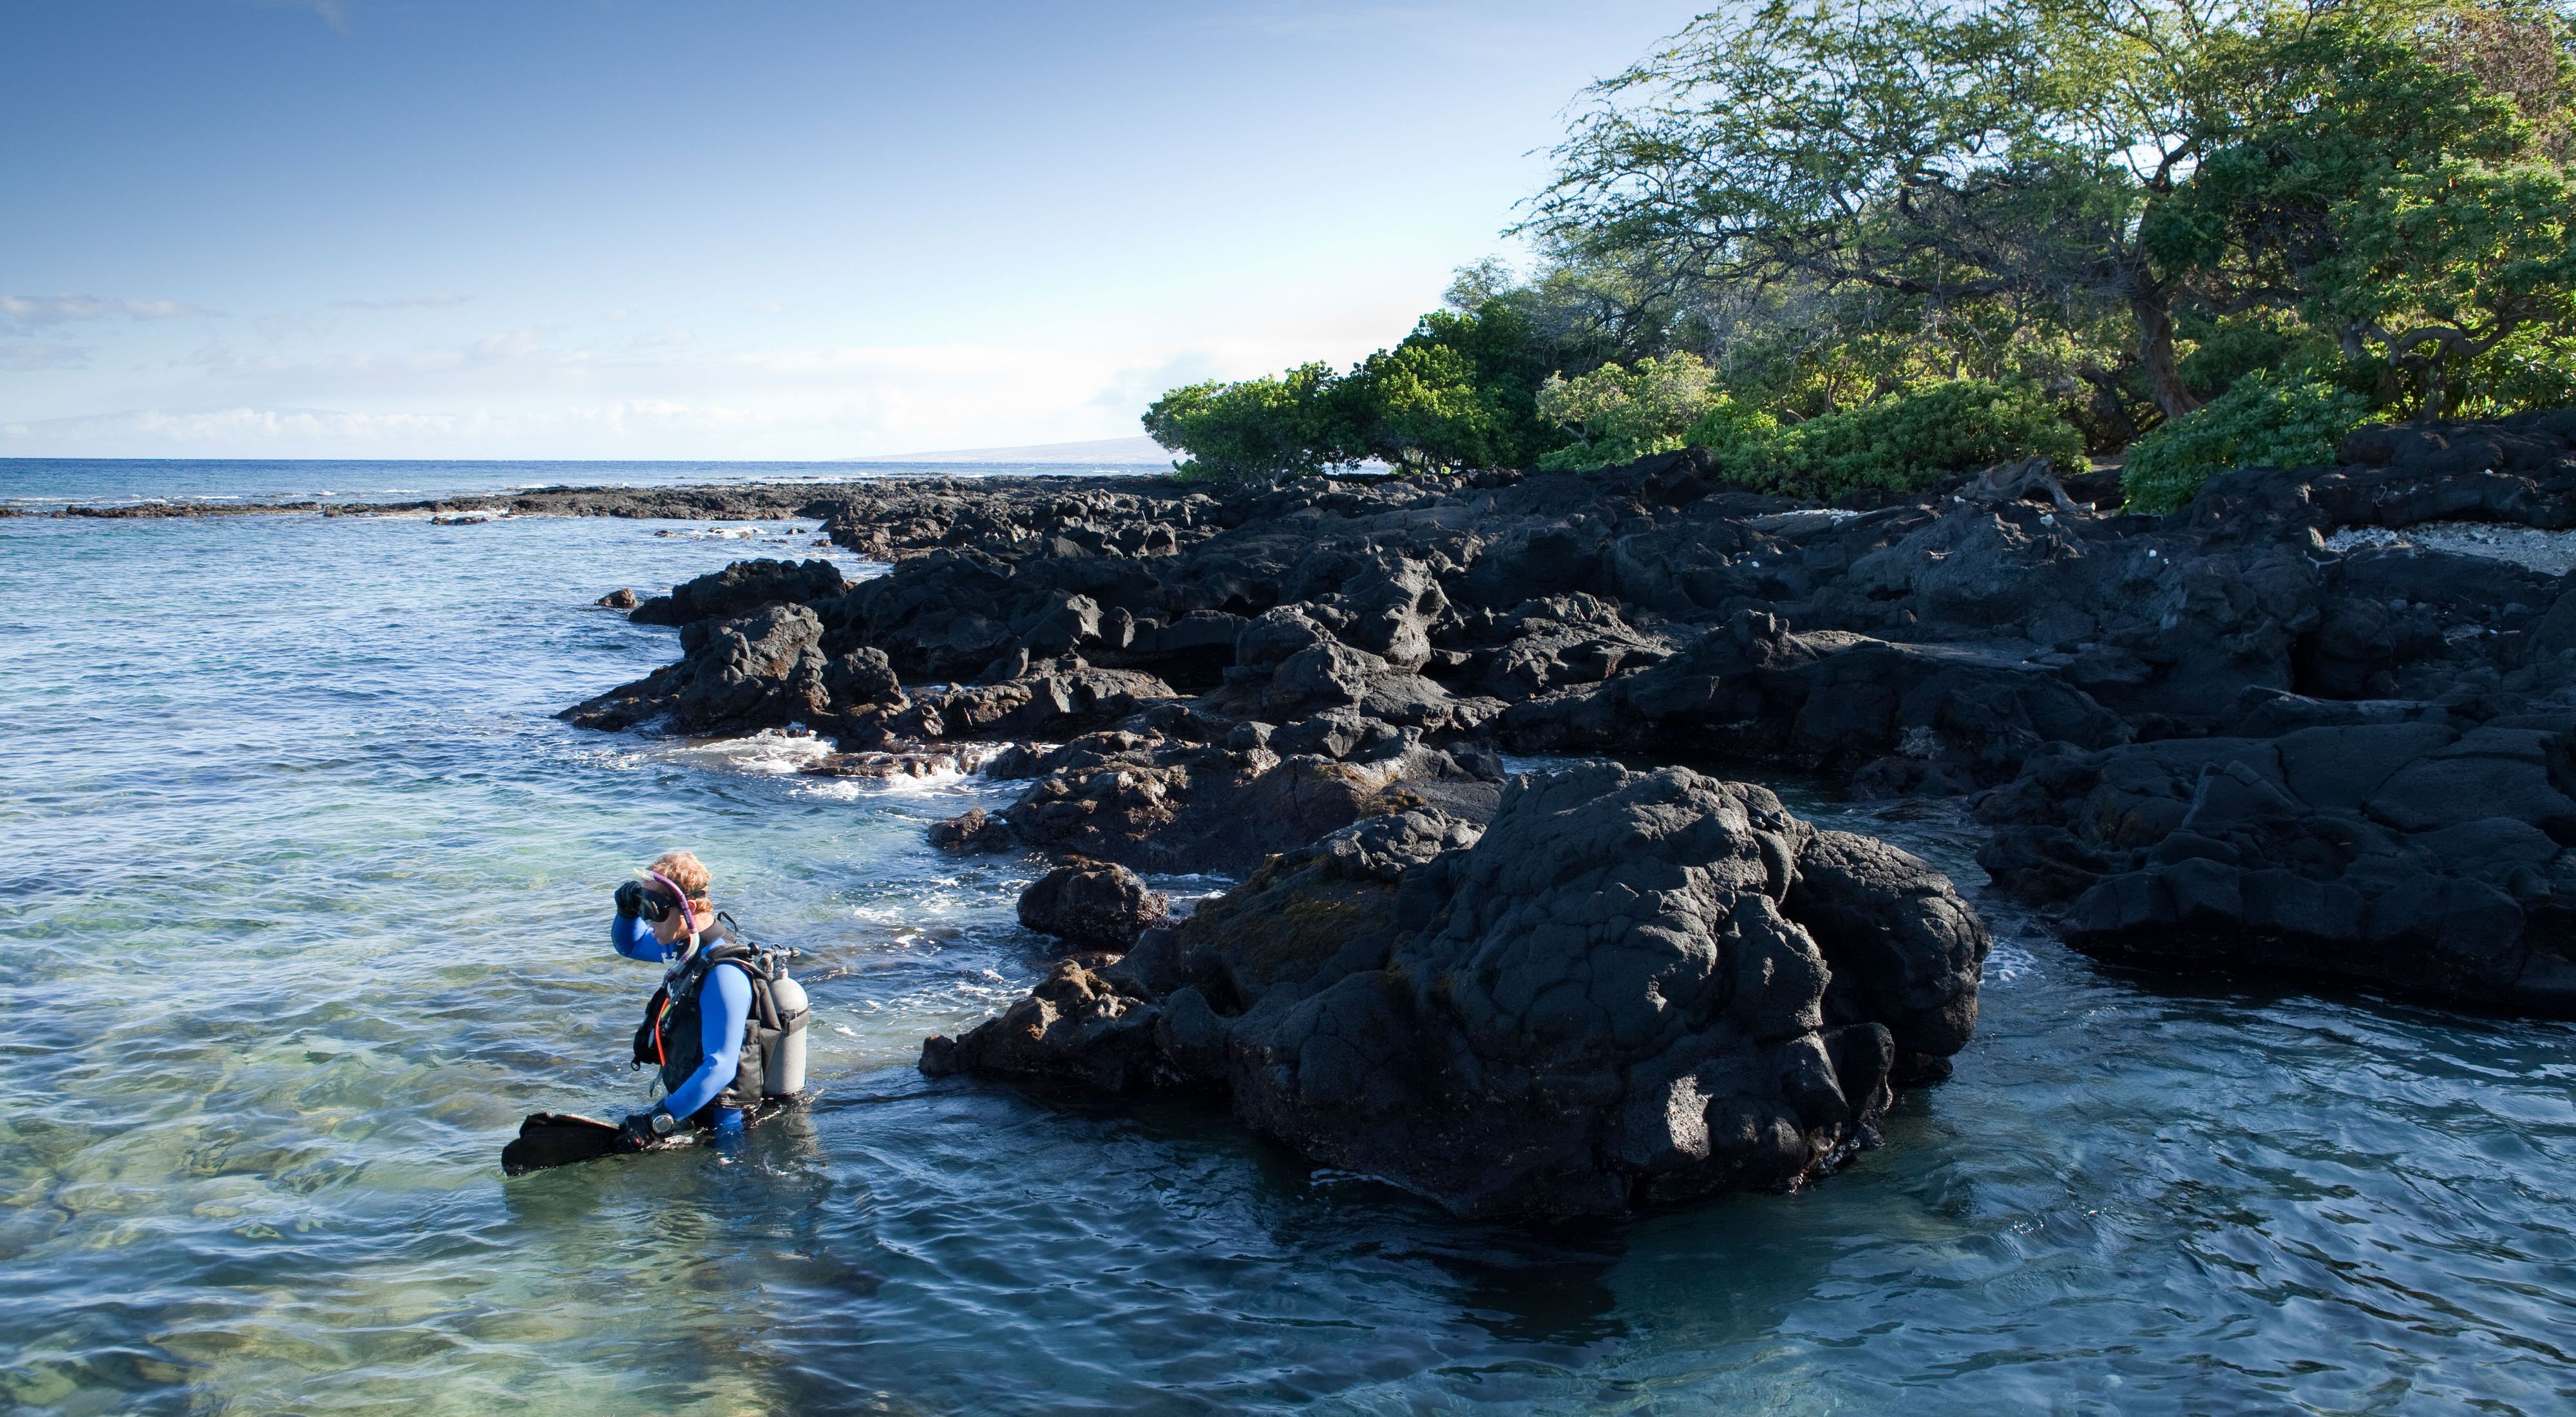 A diver entering the water from a rocky shore.